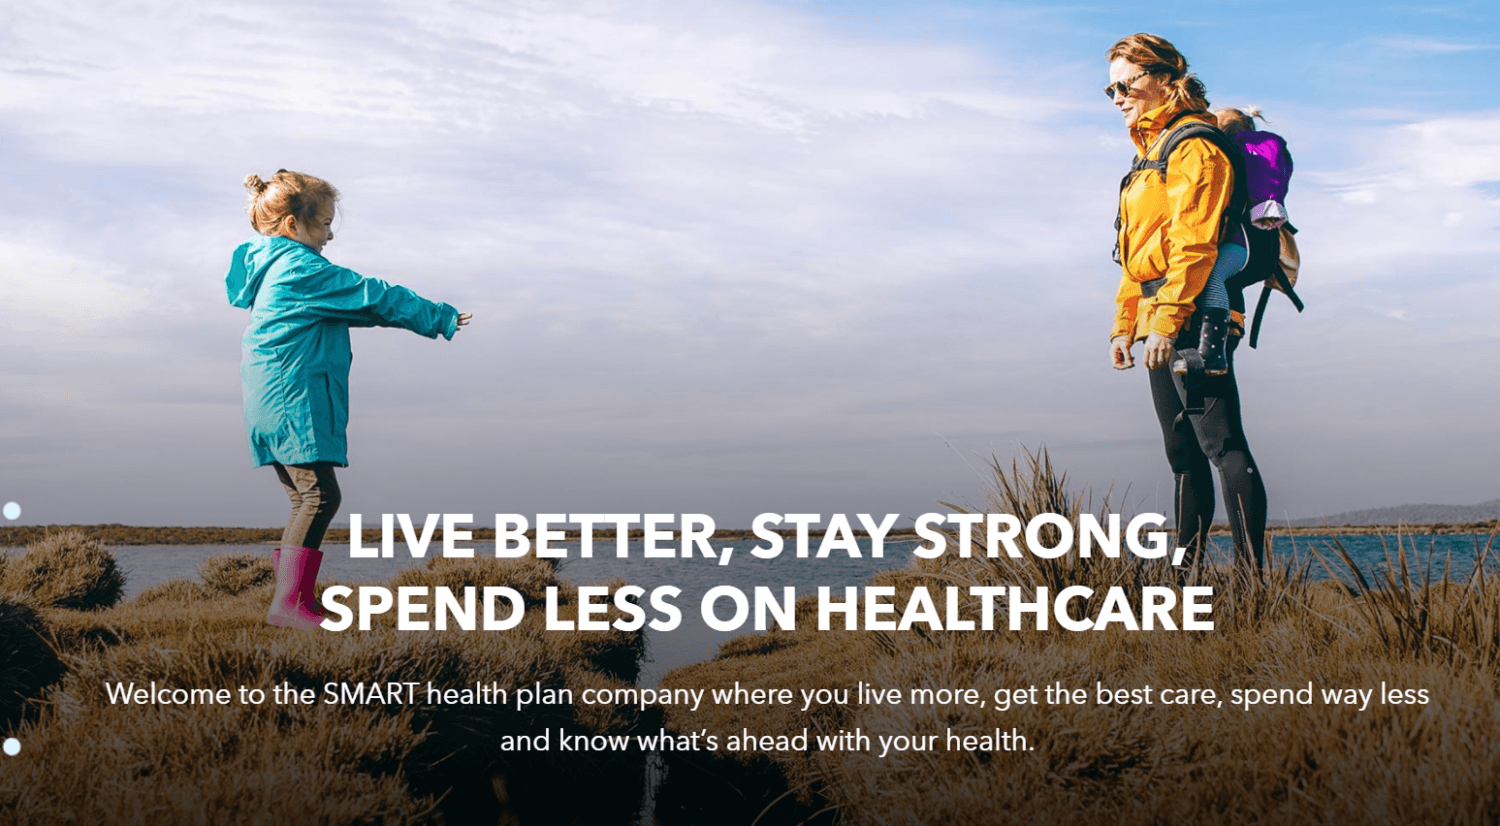 Marpai Health Acquires Continental Benefits to Launch First Smart Health Plan System